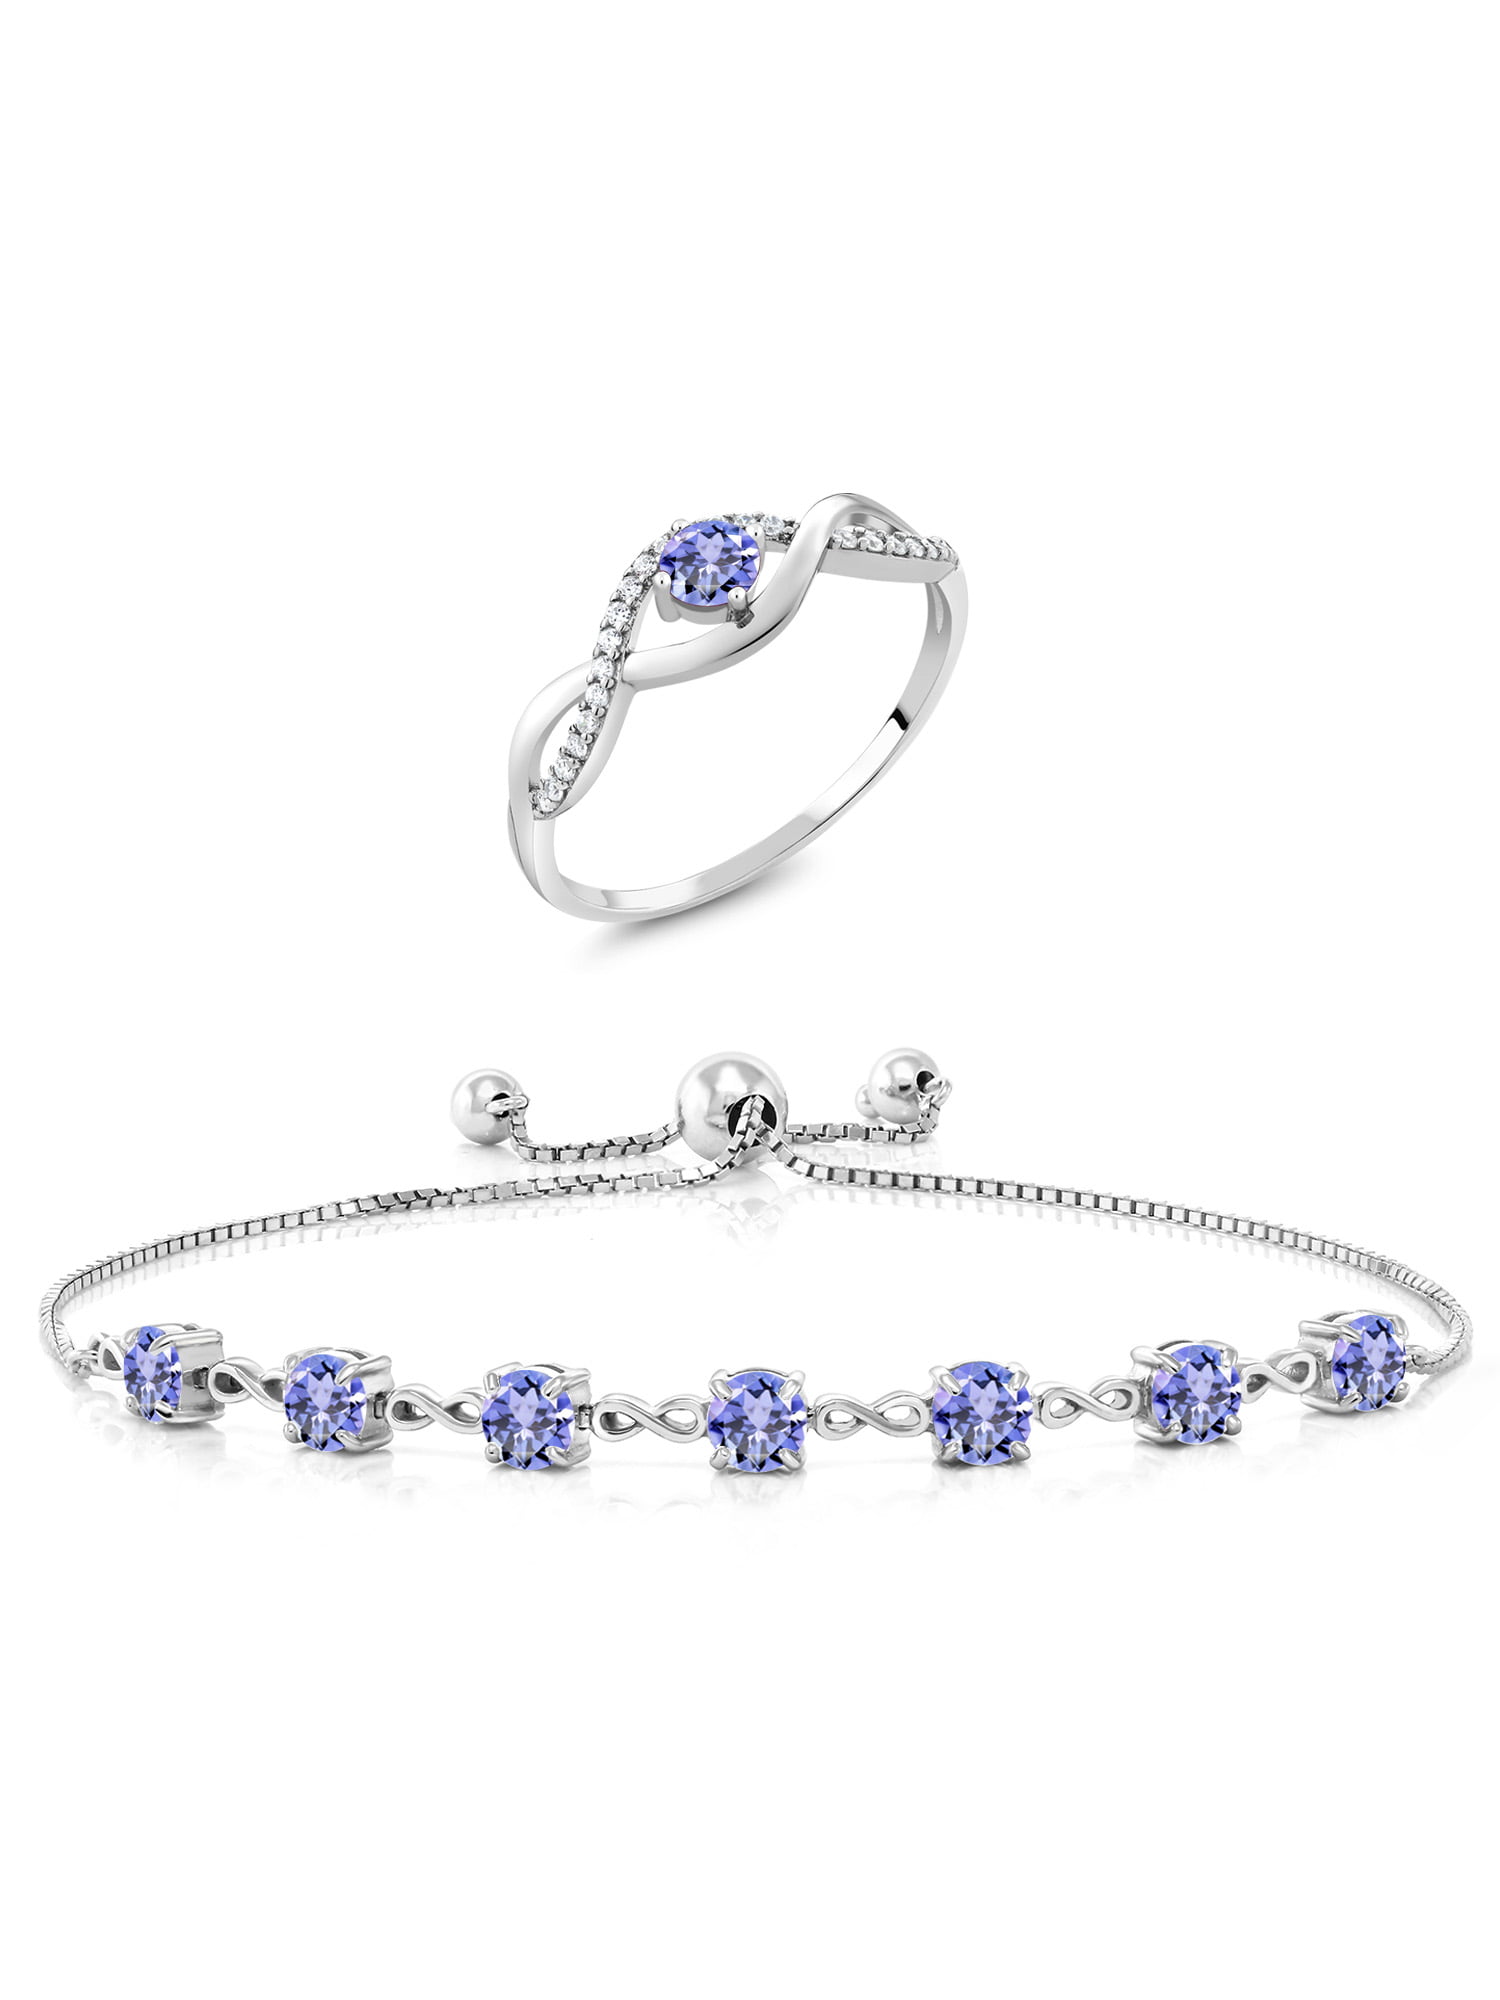 For Gift Natural Top Blue Tanzanite 2 MM Round Gemstone  925 Sterling Silver Cuff Bracelet 7-8 Inch For Love